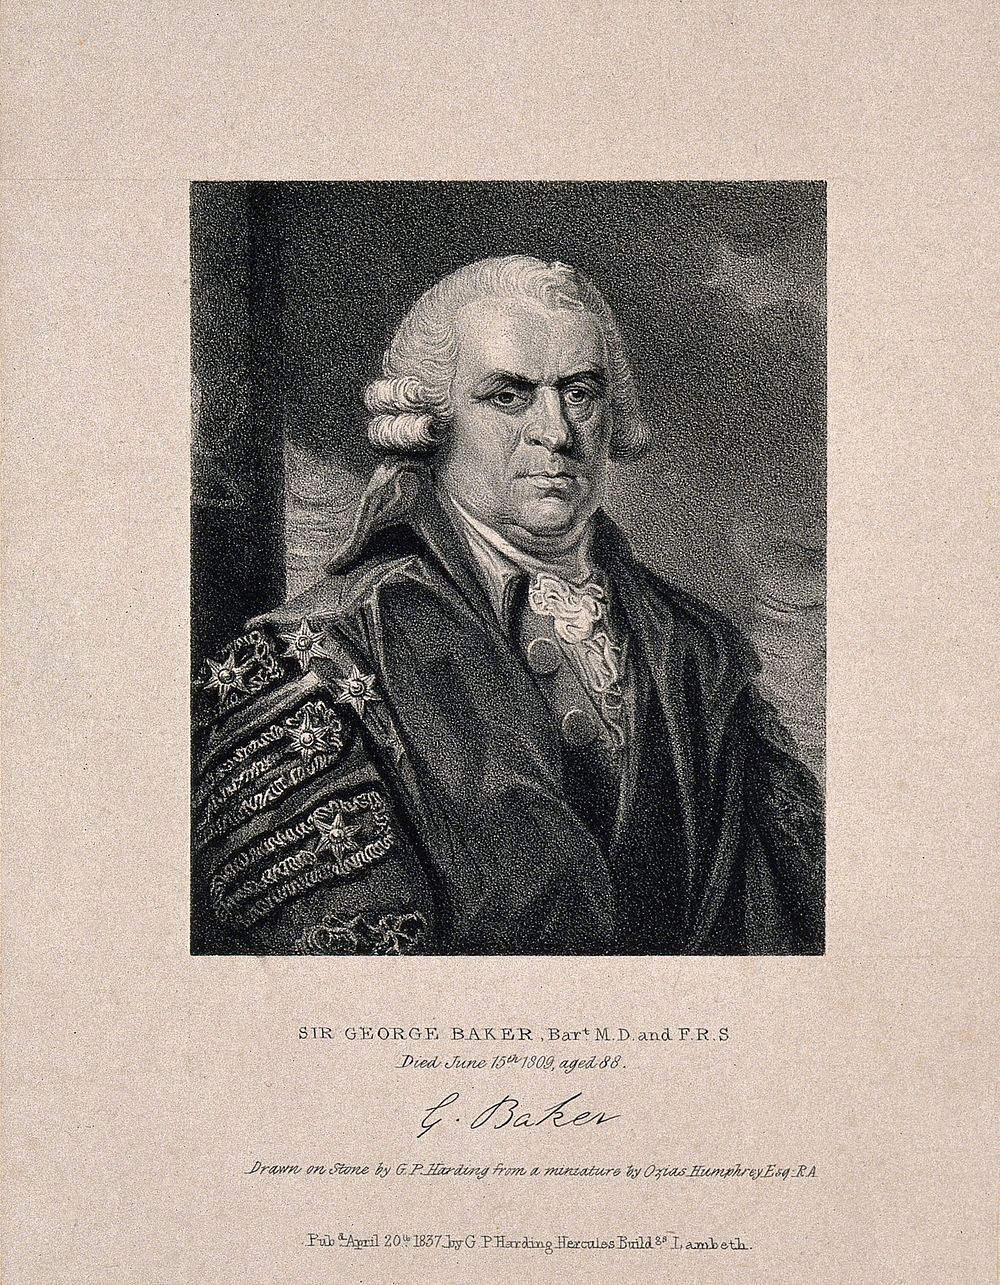 Sir George Baker. Lithograph by G. P. Harding, 1837, after O. Humphry.